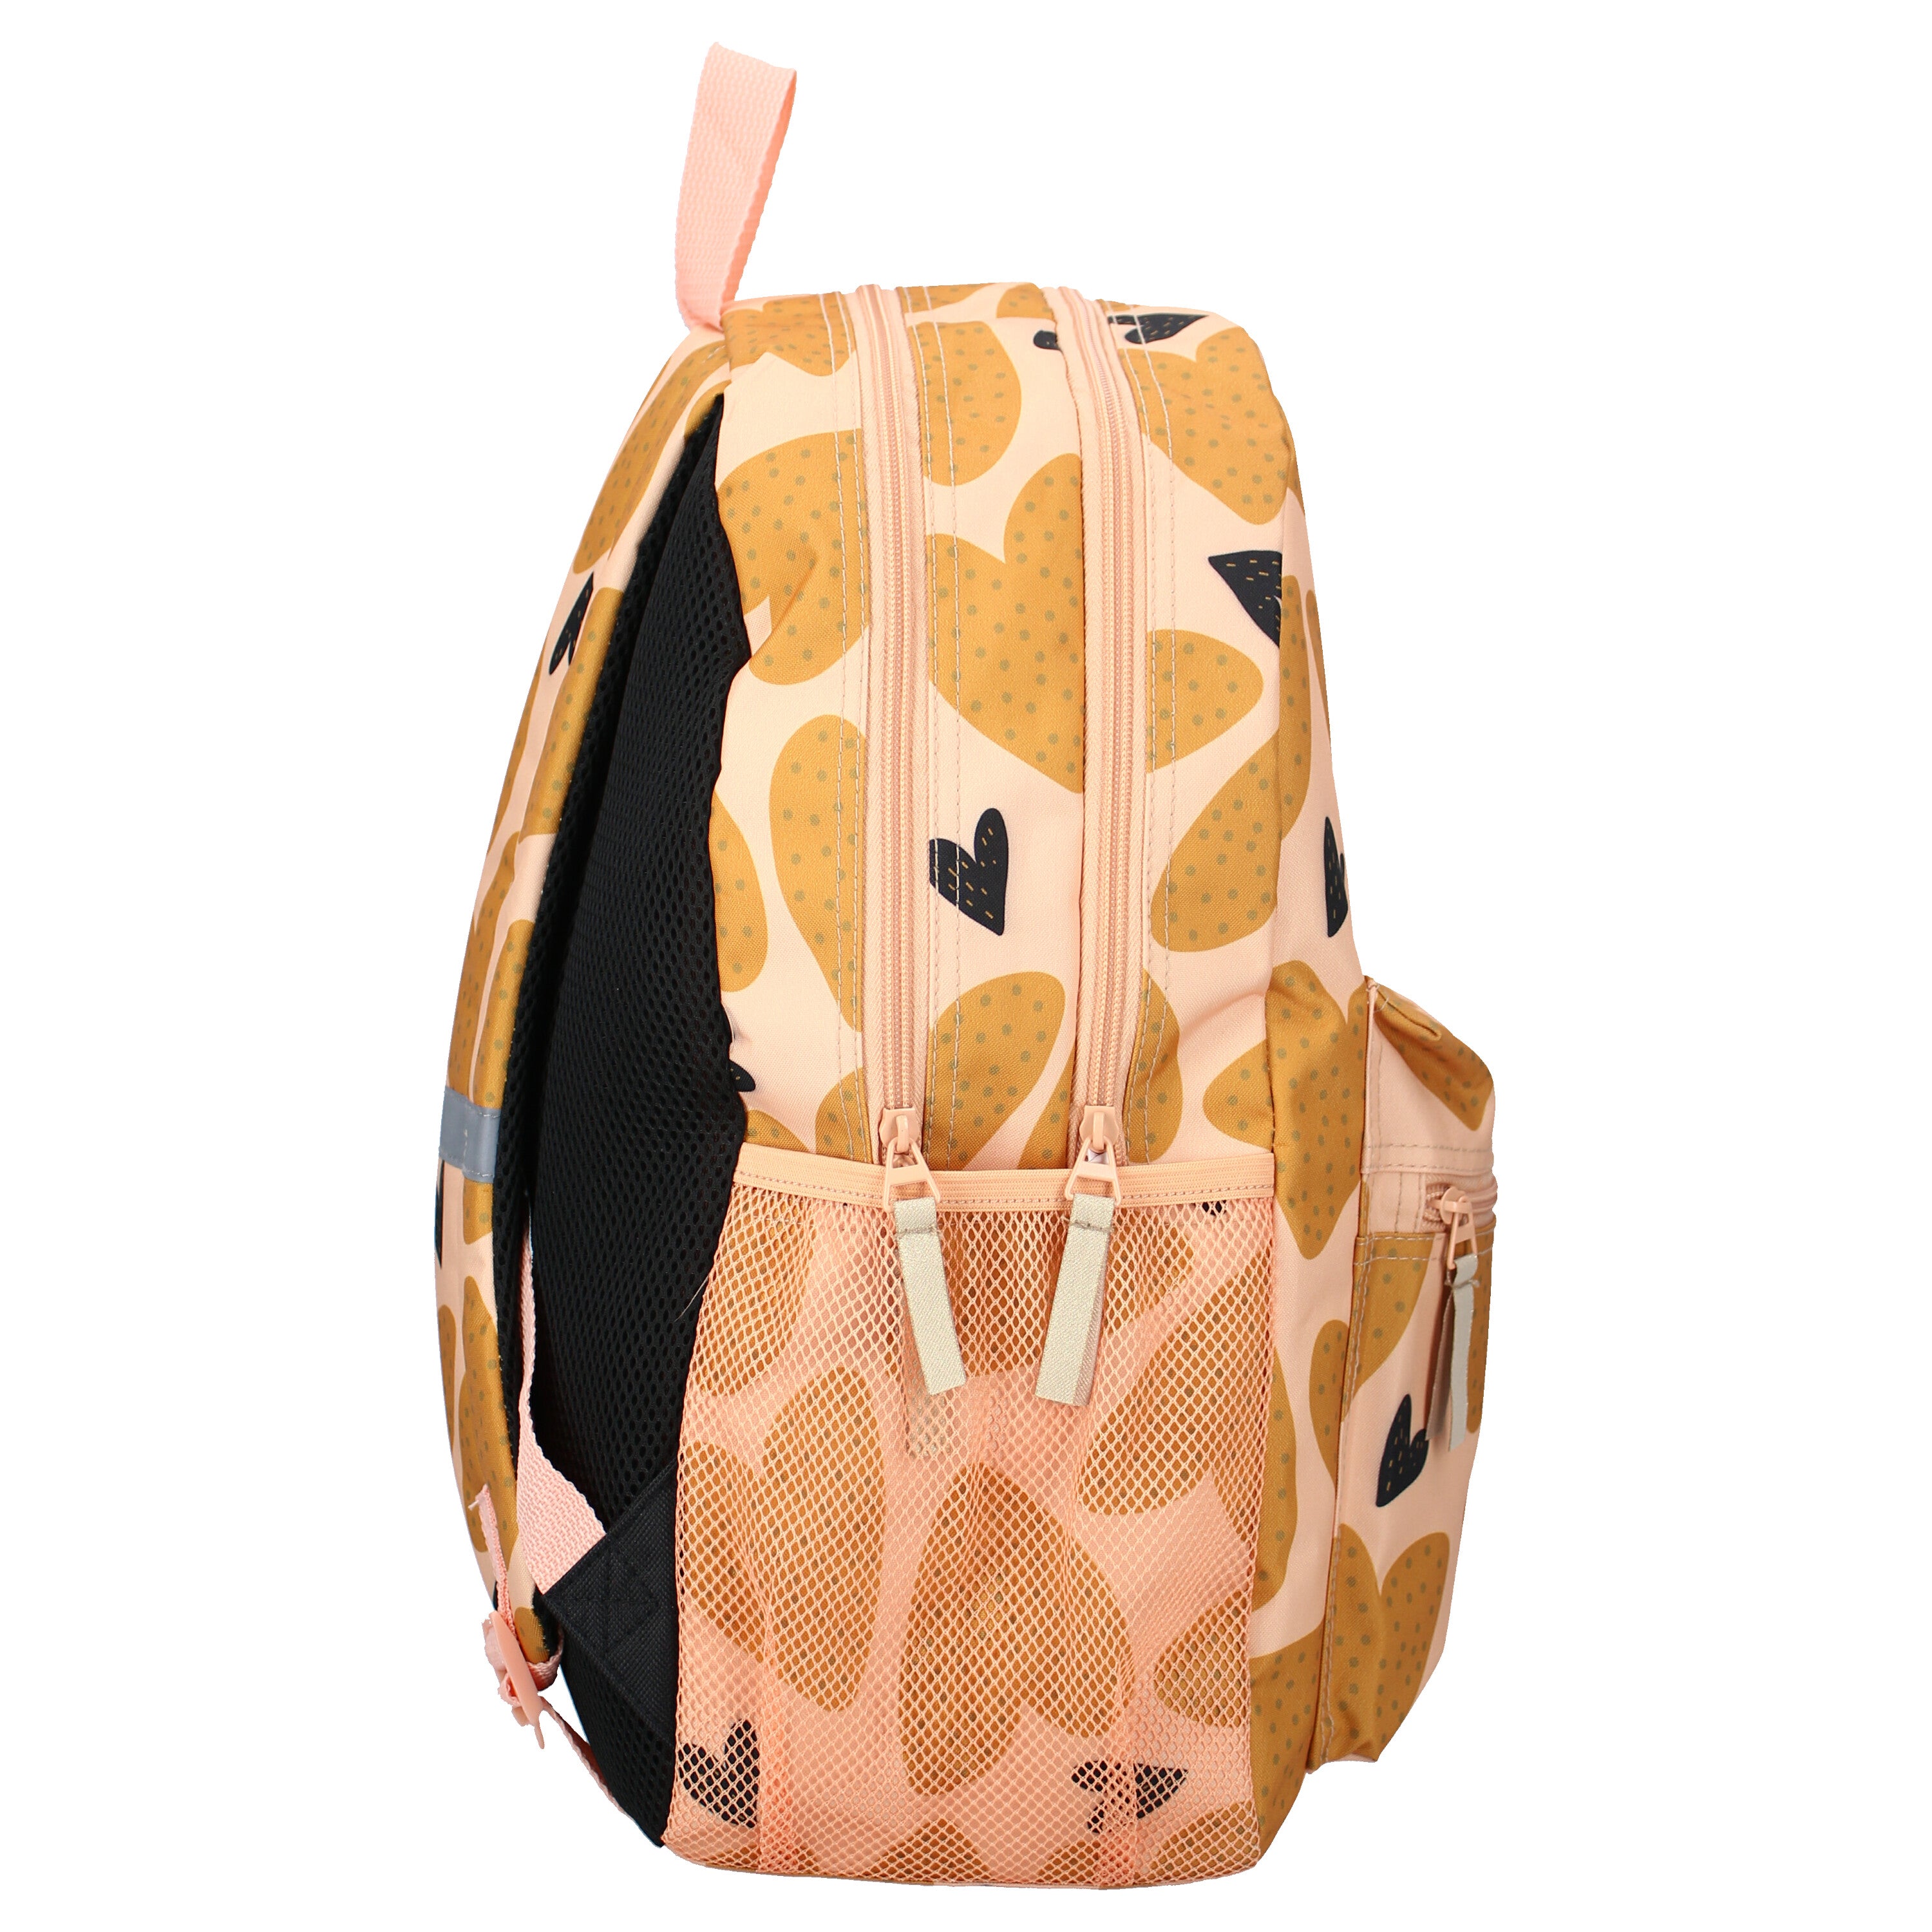 Milky Kiss Backpack Just For Me Yellow